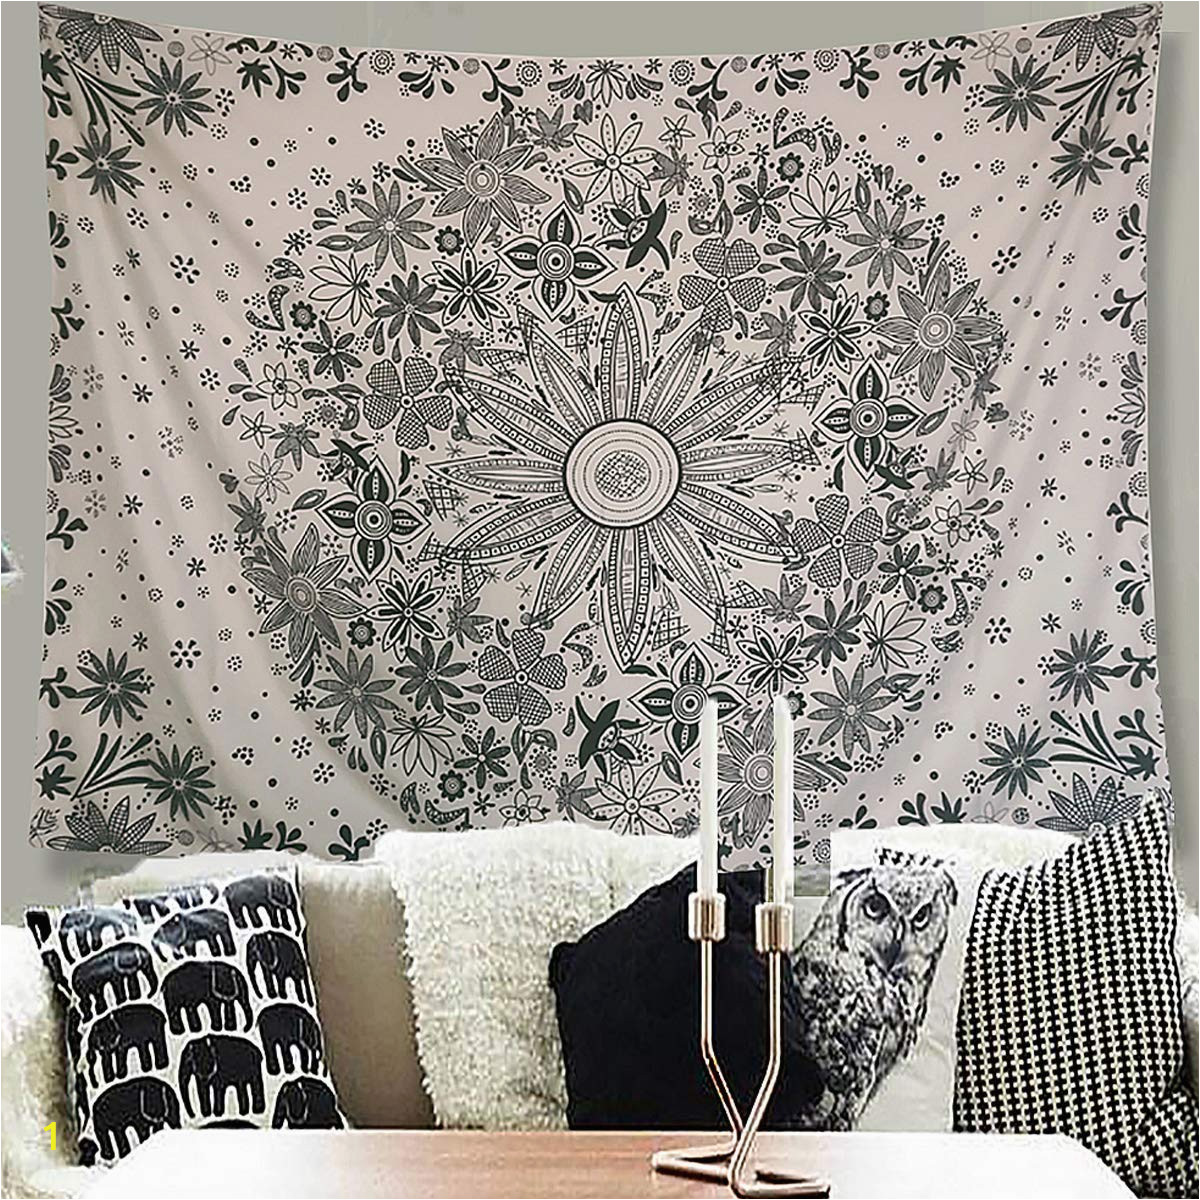 Rose Metal Wall Mural athorbot Bohemian Tapestry Wall Hanging Hippie Mandala Tapestry White Floral Wall Art Collage Dorm Home Decor Beach 80 X 60 Inch